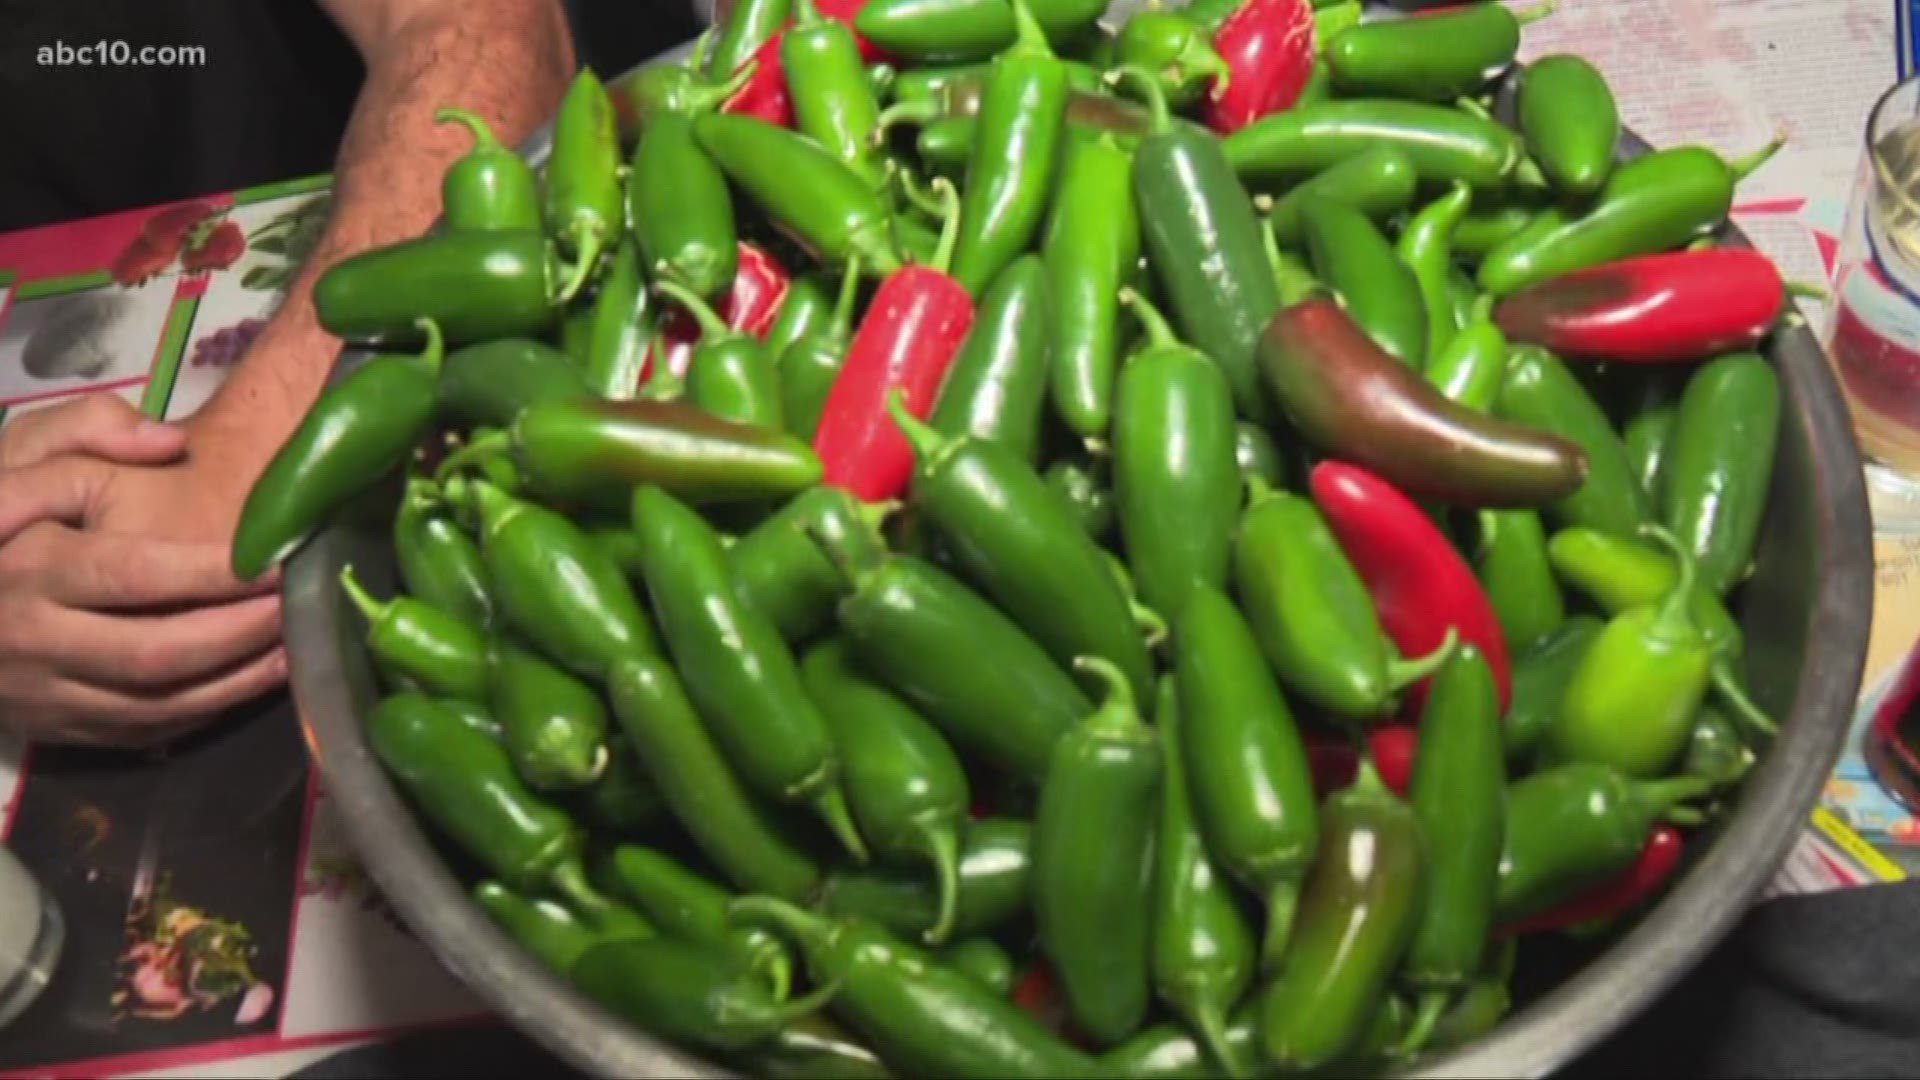 The Pepper Festival and Hot Sauce Expo is in Auburn this weekend, so we sent Mark S. Allen, the former world record holder for eating the most Jalapeno Peppers in one minute, to eat some peppers.